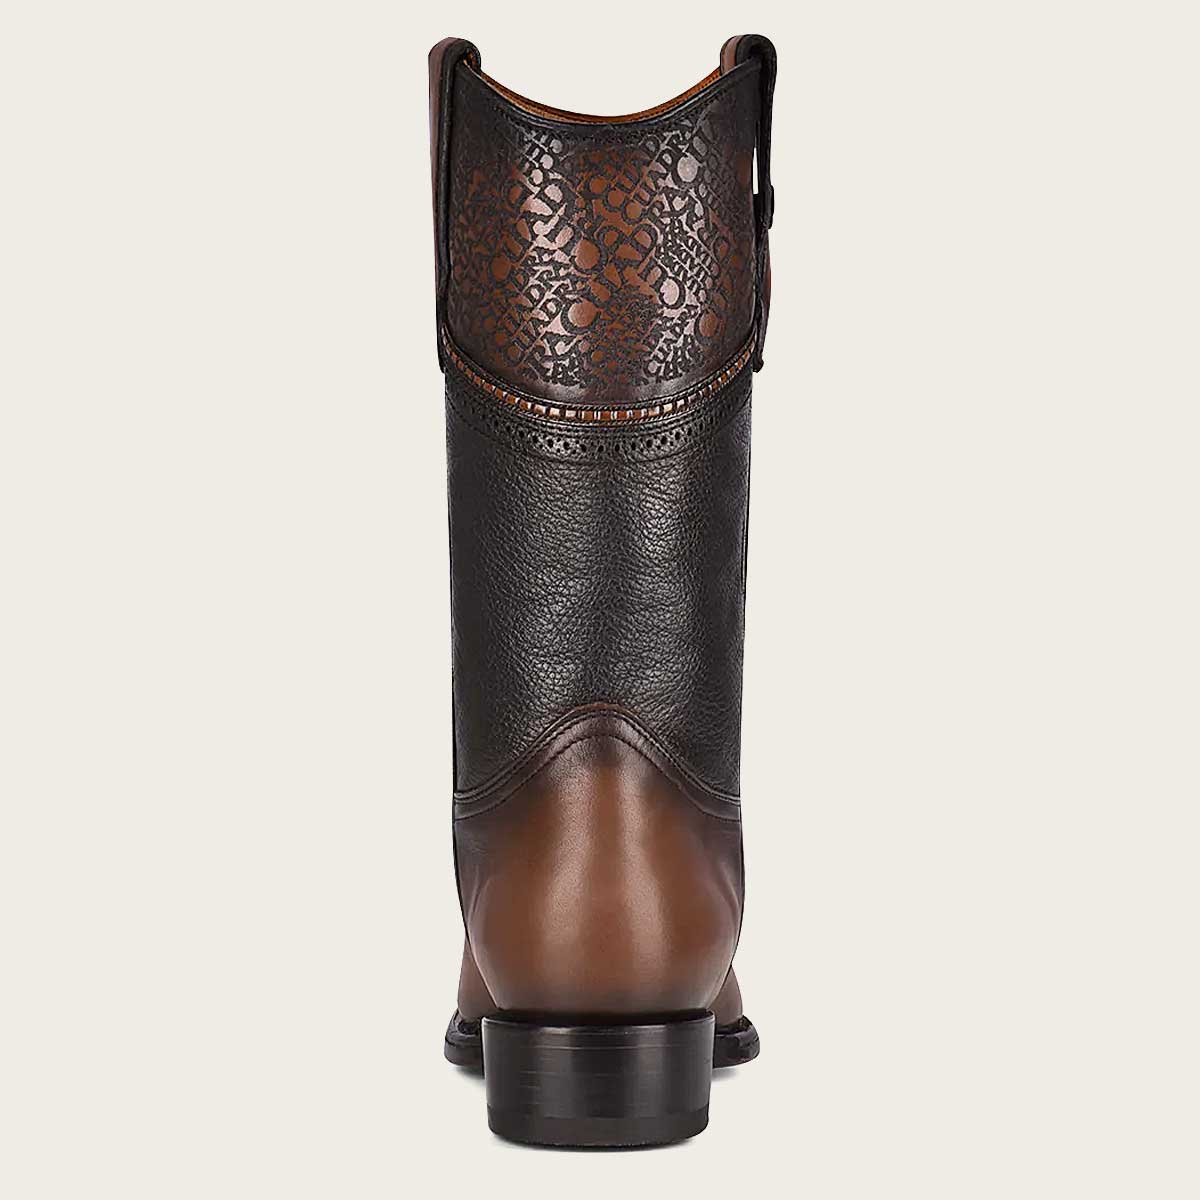 The laser-engraved Cuadra monogram embellishes the boot with a touch of elegance, elevating its overall charm